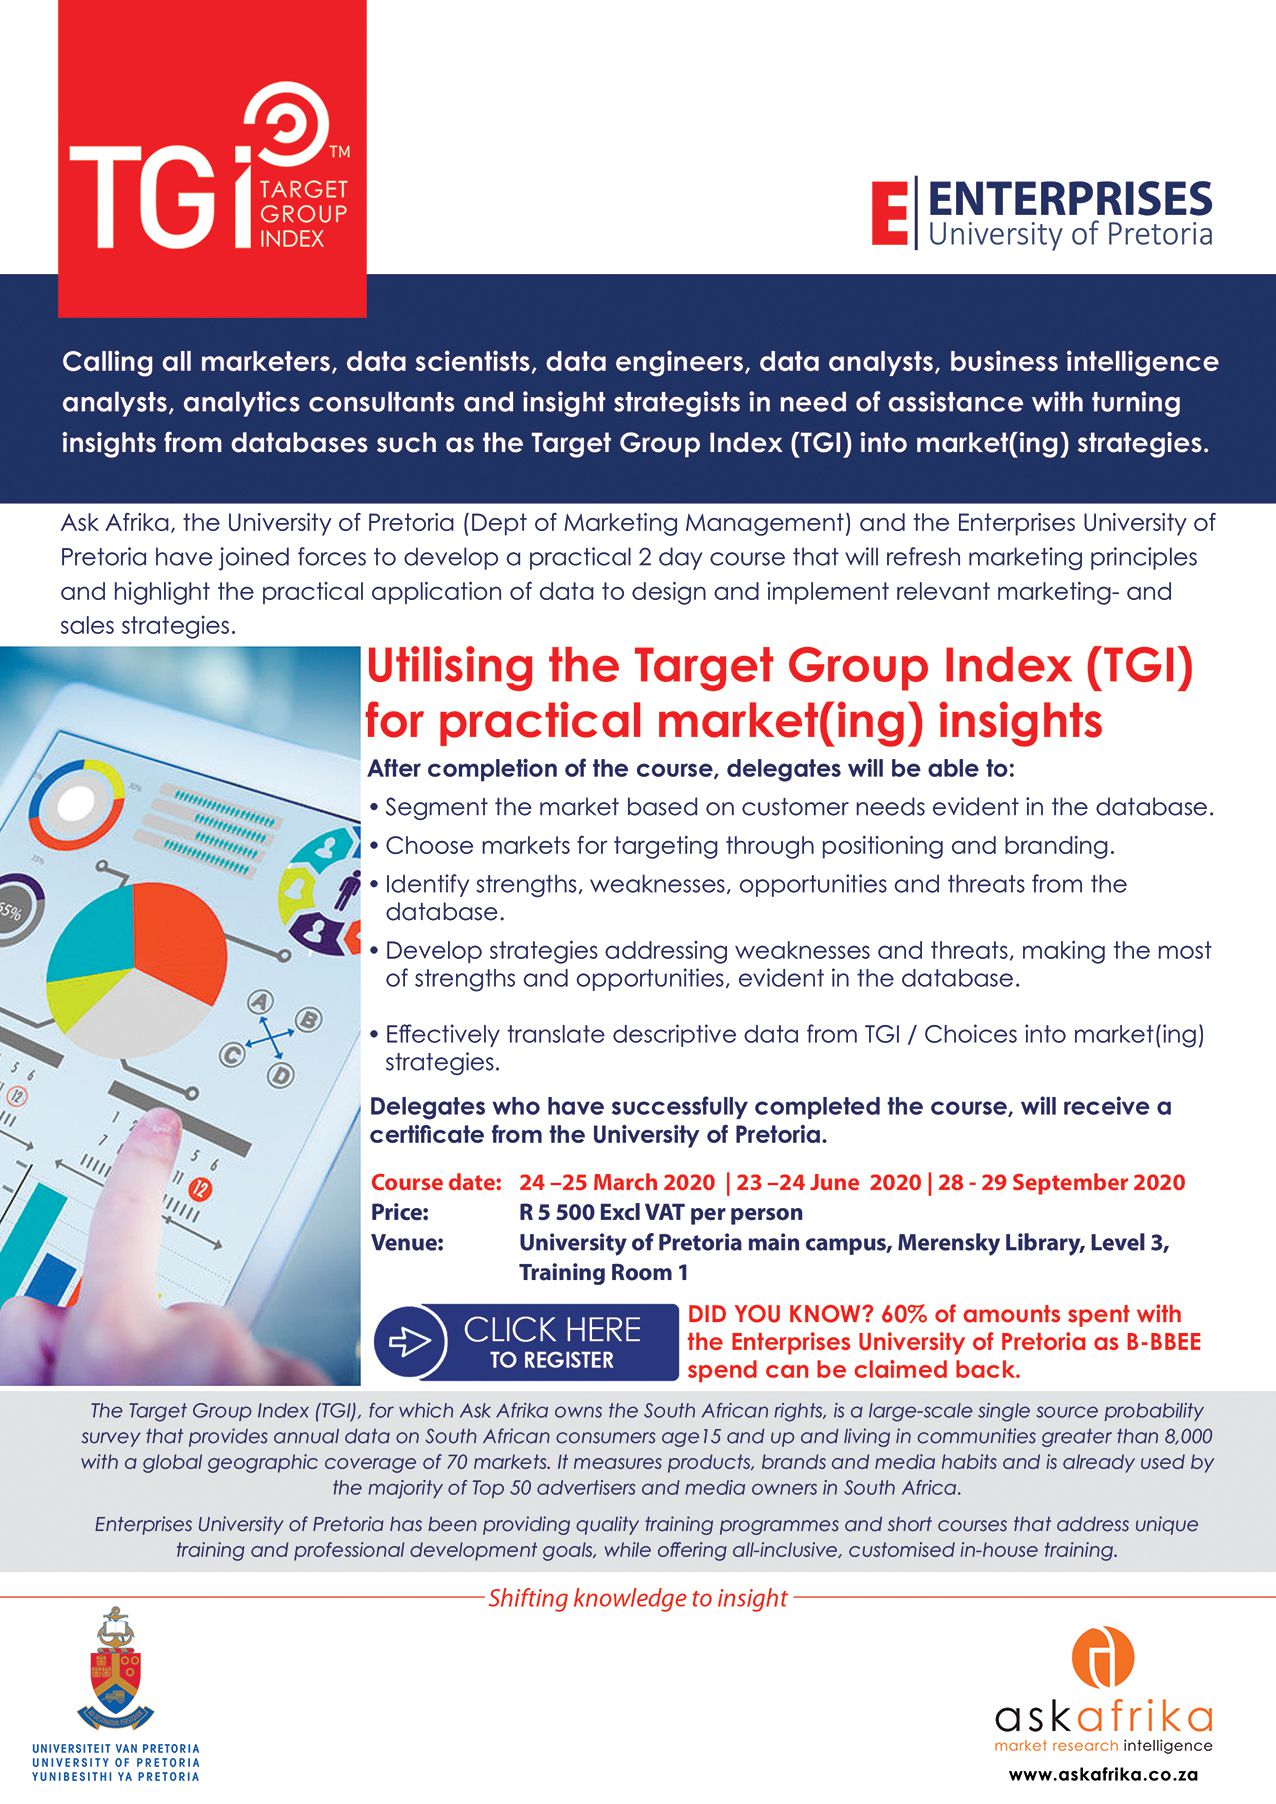 The Target Group Index (TGI) data set - Empowering students and business leaders of tomorrow alongside the University of Pretoria